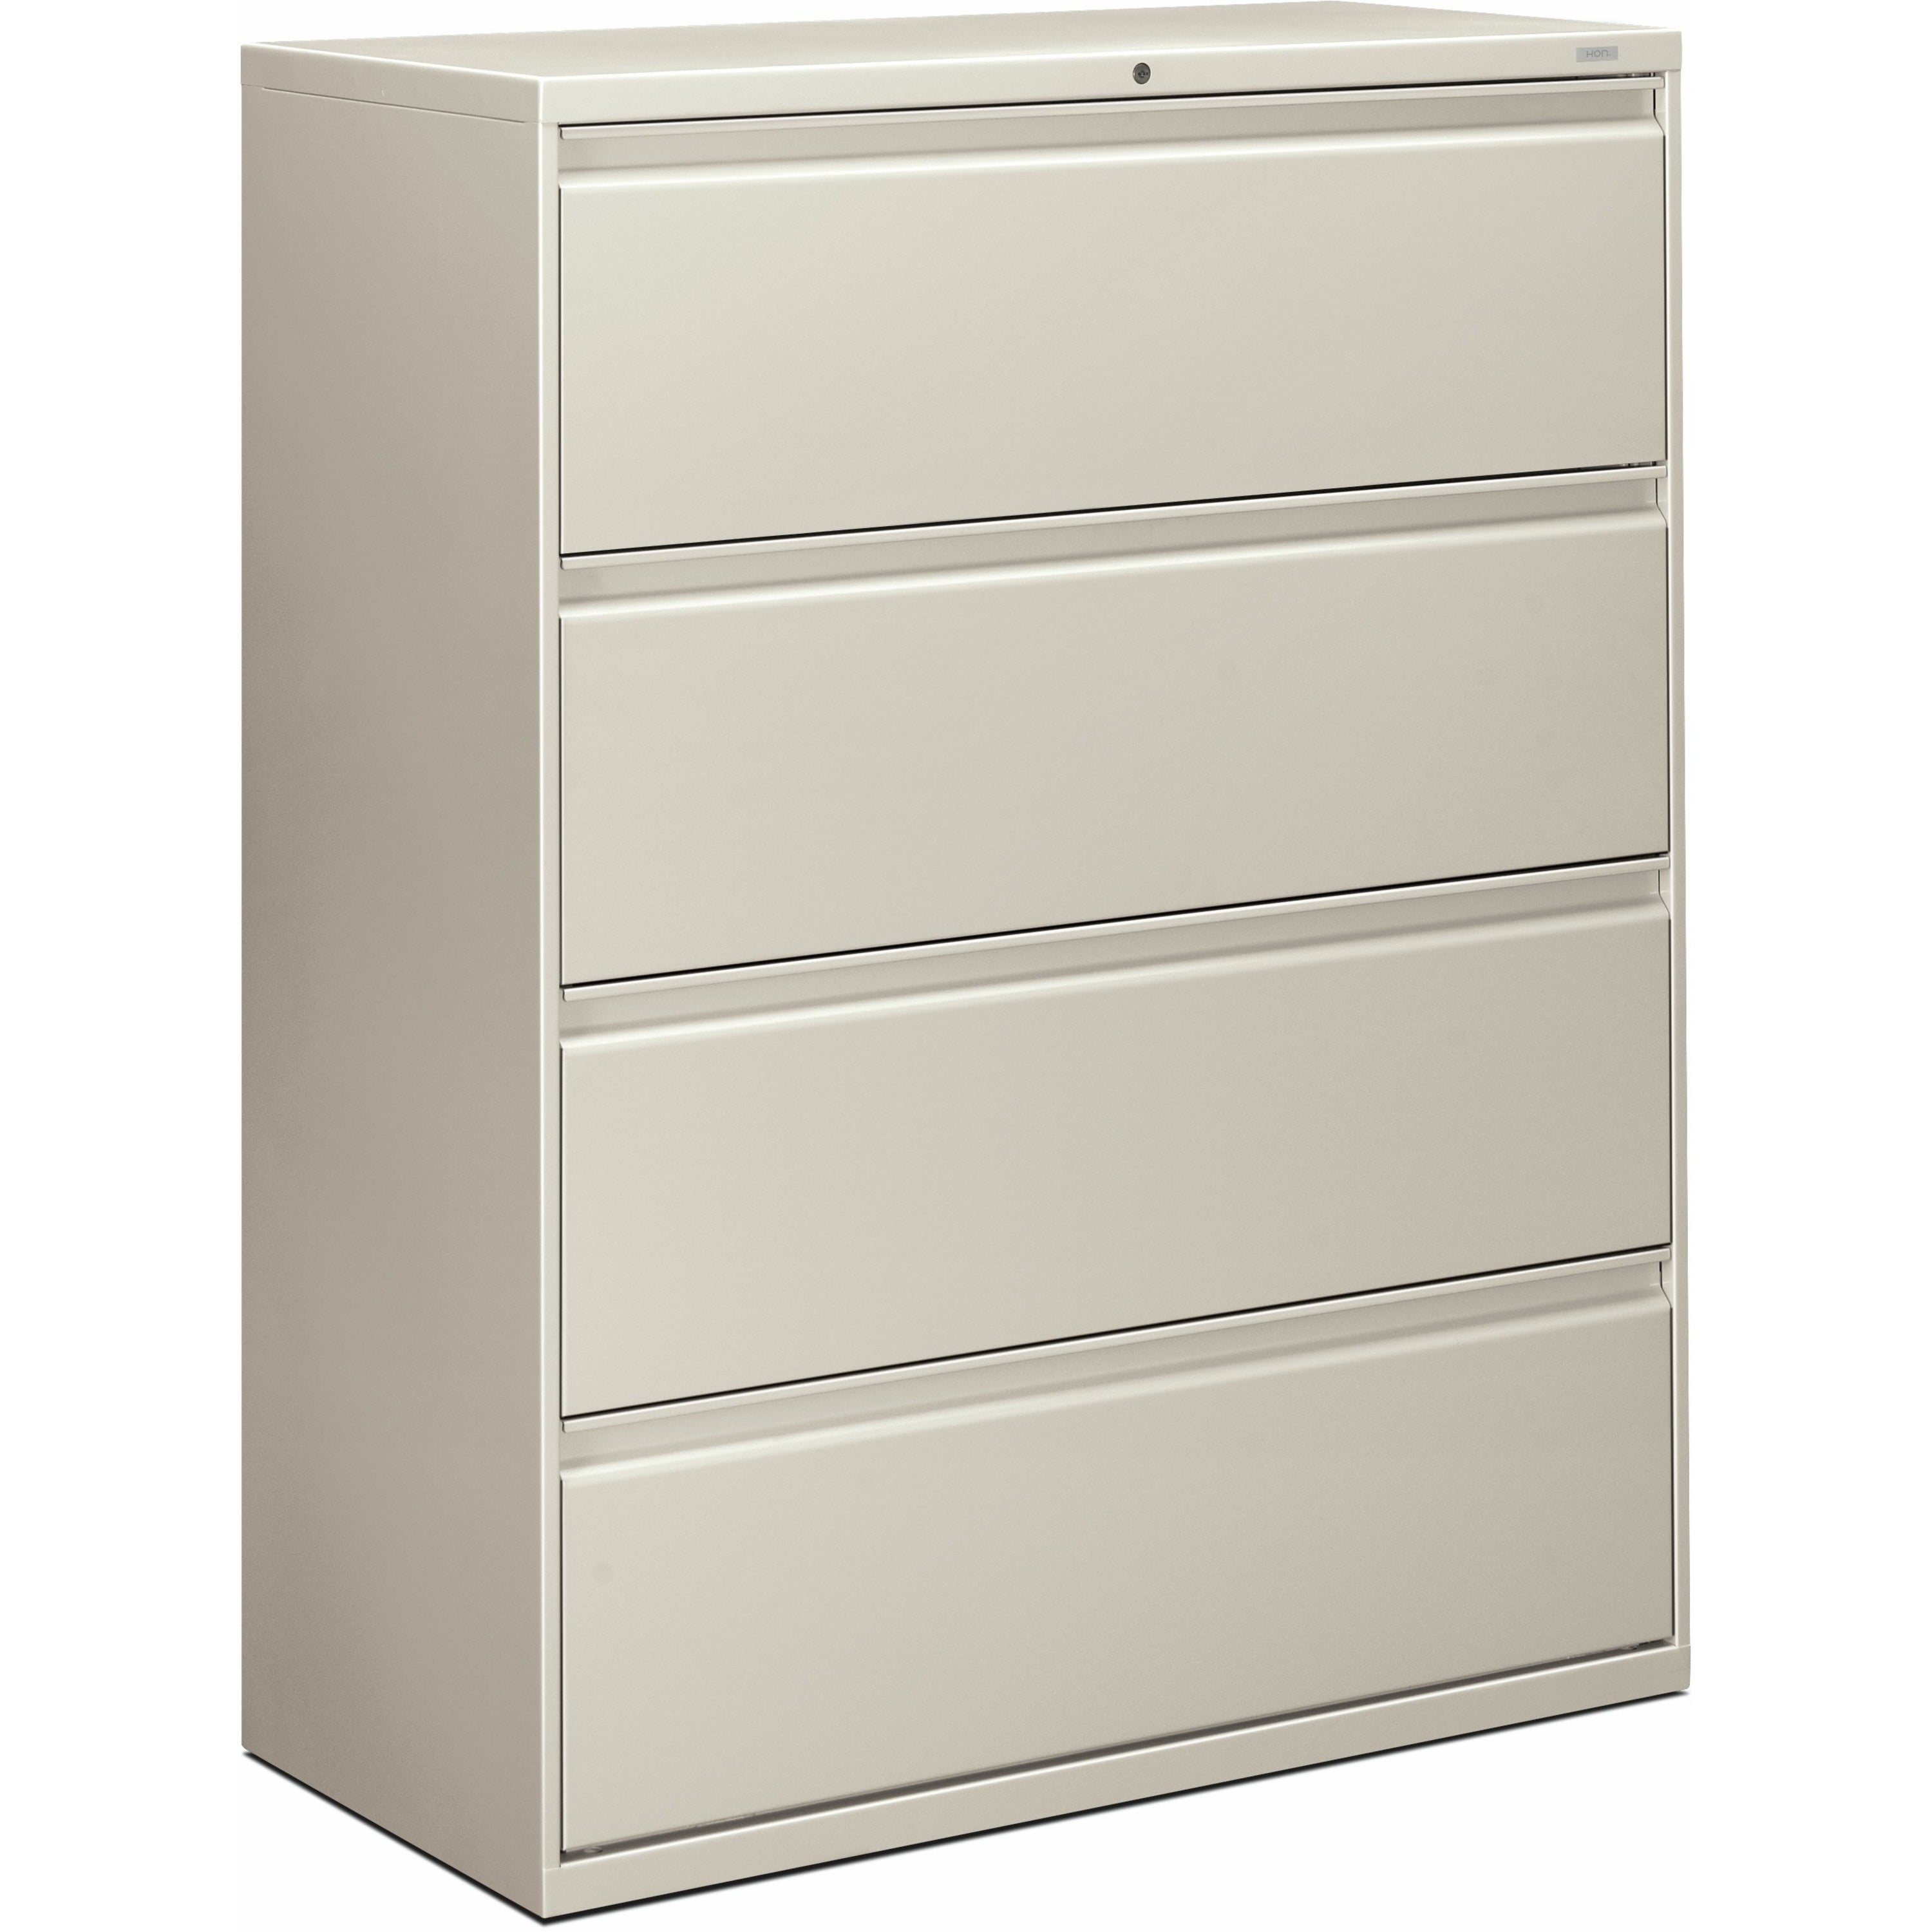 HON Brigade 800 H894 Lateral File - 42" x 18"53.3" - 4 Drawer(s) - Finish: Light Gray - 